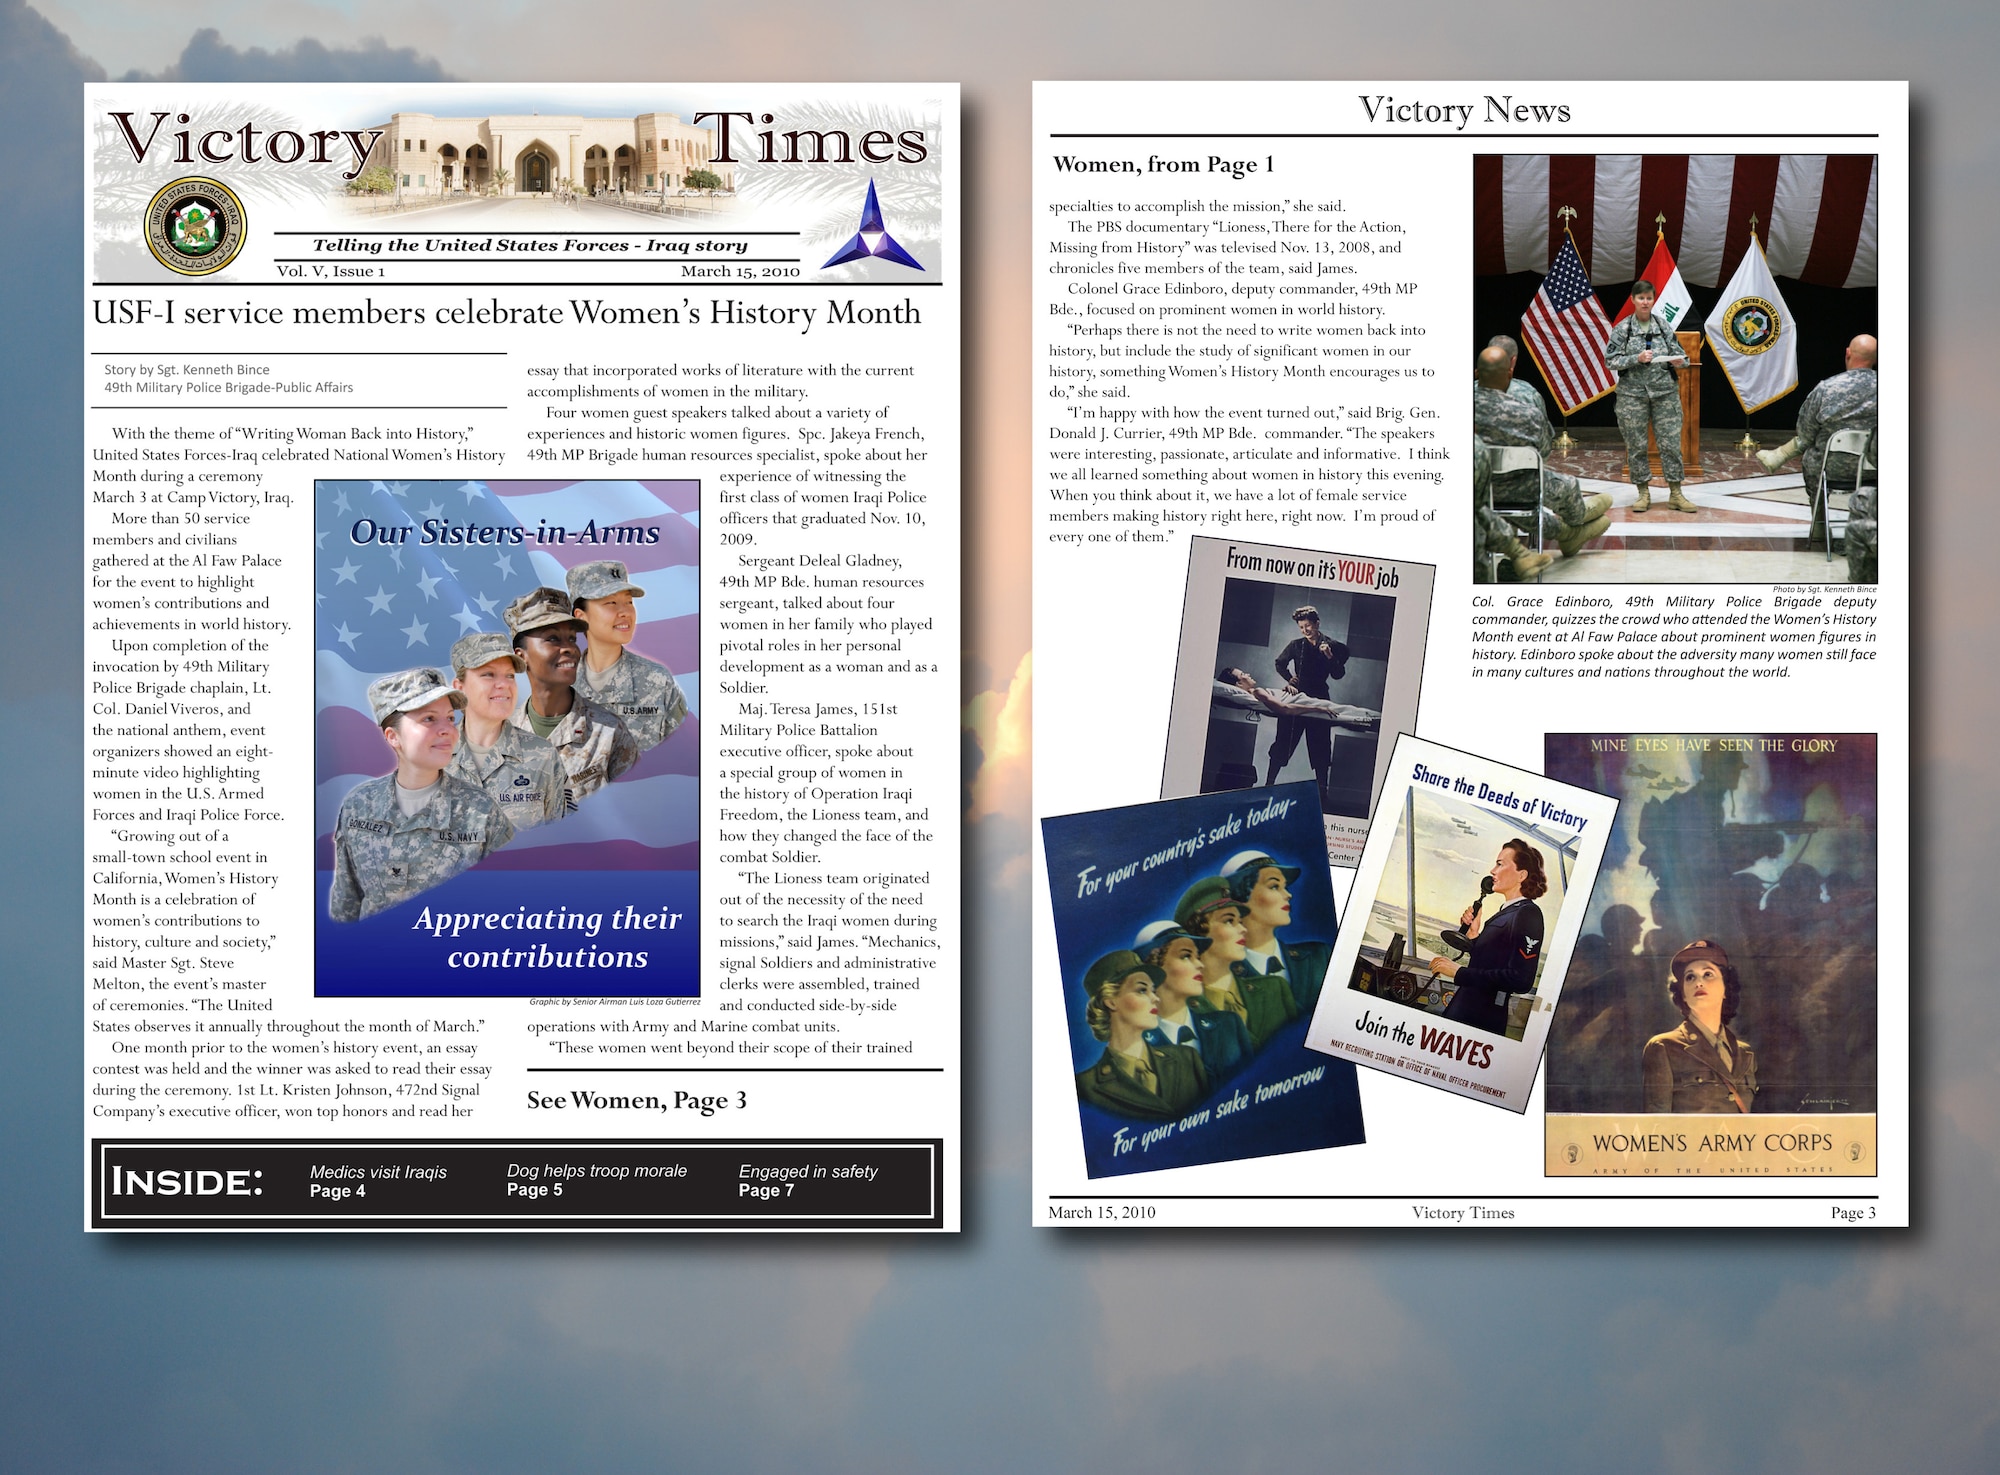 Victory Times March 2010 publication featuring article and images for Women's History Month. As a senior airman, Staff. Sgt. Luis Loza Gutierrez played tribute to all U.S. servicewomen by redesigning the blue World War II era poster on the right. The new design ran on the front page and offered a culturally diverse representation of the women who serve in the military today. (U.S. Air Force graphic/Staff Sgt. Luis Loza Gutierrez)